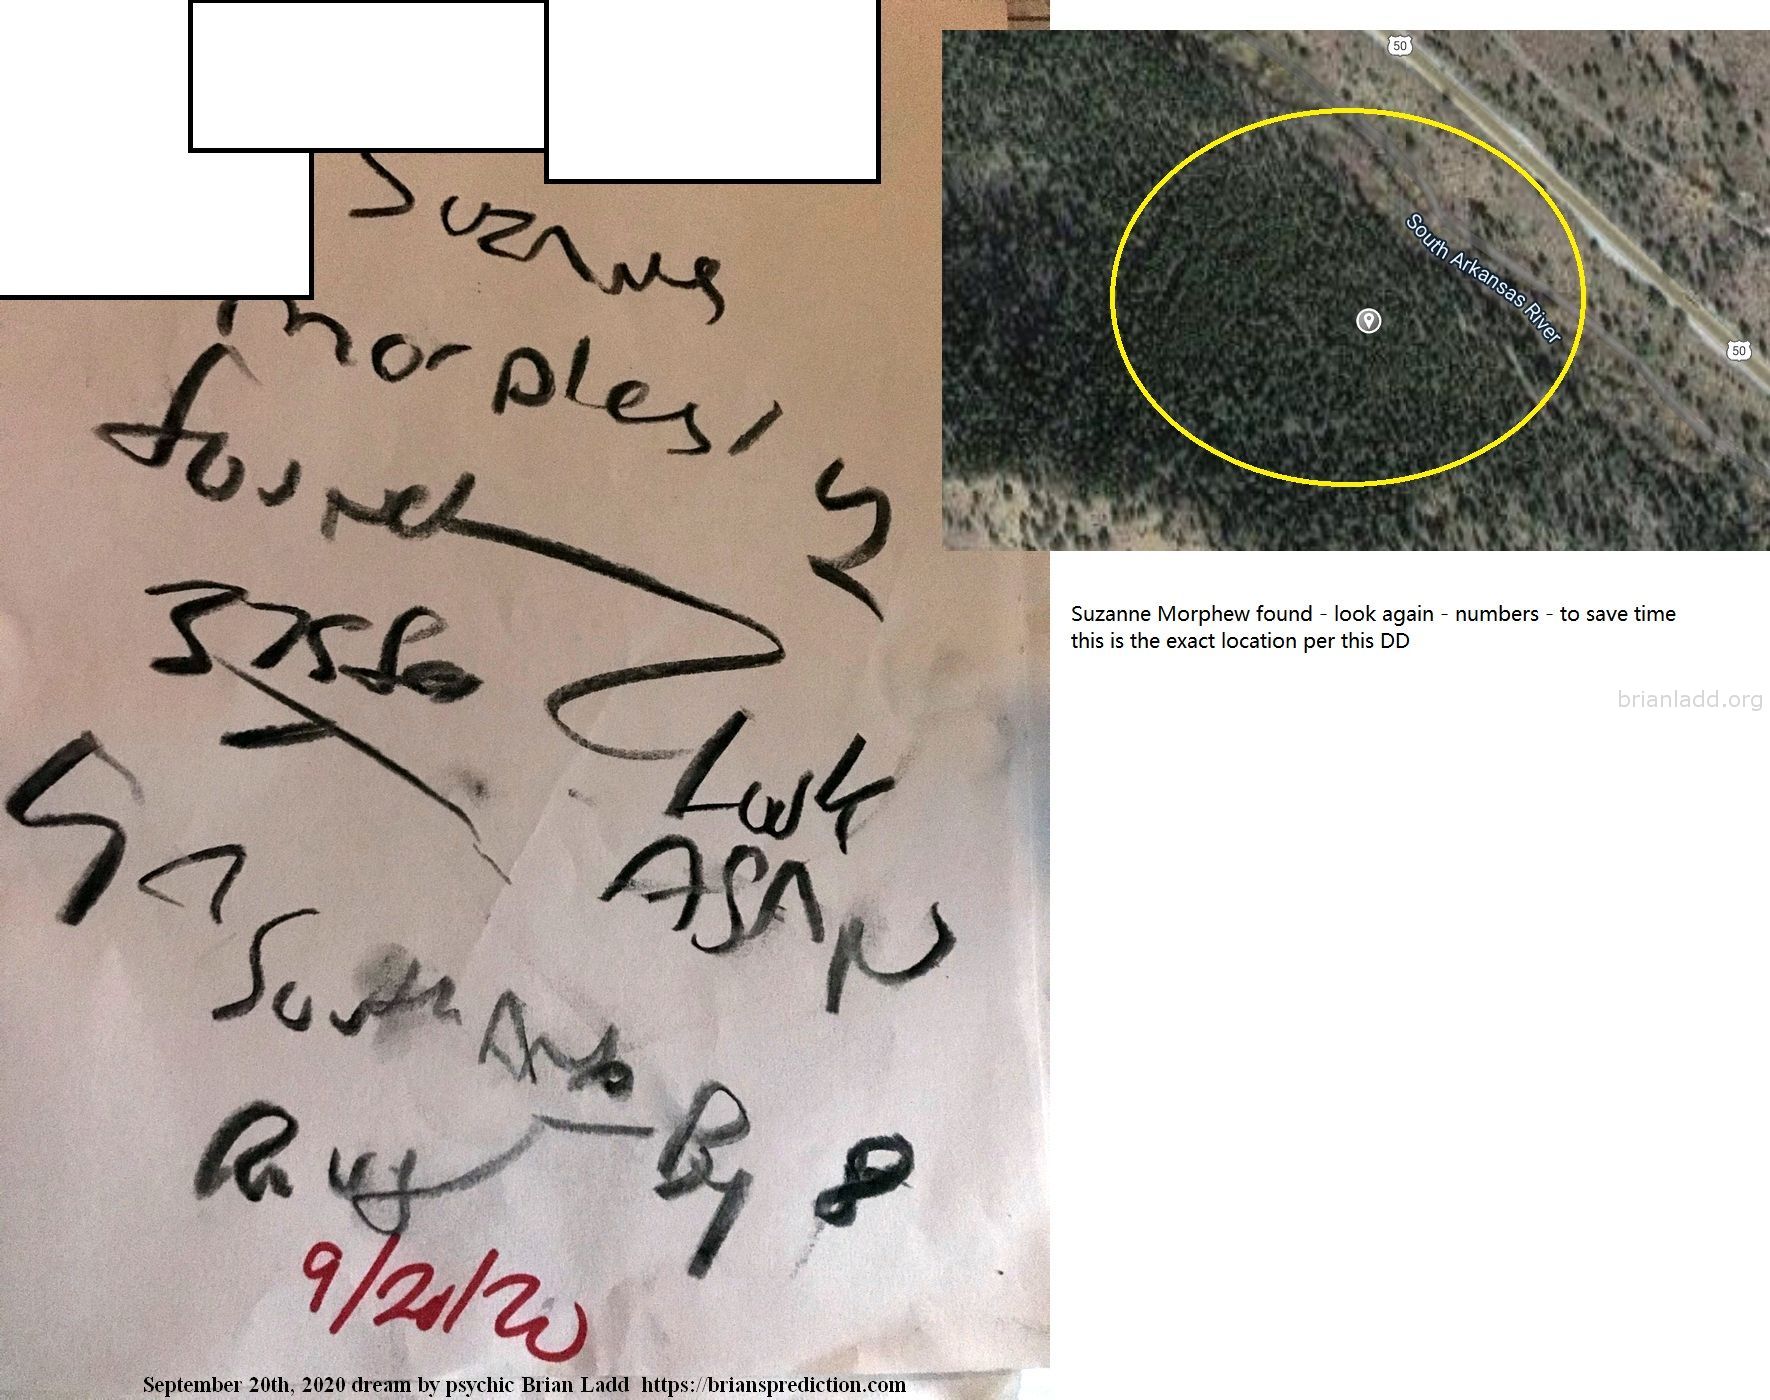 13670 20 September 2020 2 - Suzanne Morphew Found - Look Again - Numbers - To Save Time  This Is The Exact Location Per ...
Suzanne Morphew Found - Look Again - Numbers - To Save Time  This Is The Exact Location Per This Dd  Case At   https://briansprediction.com/Thumbnails.Php?Album=2519
